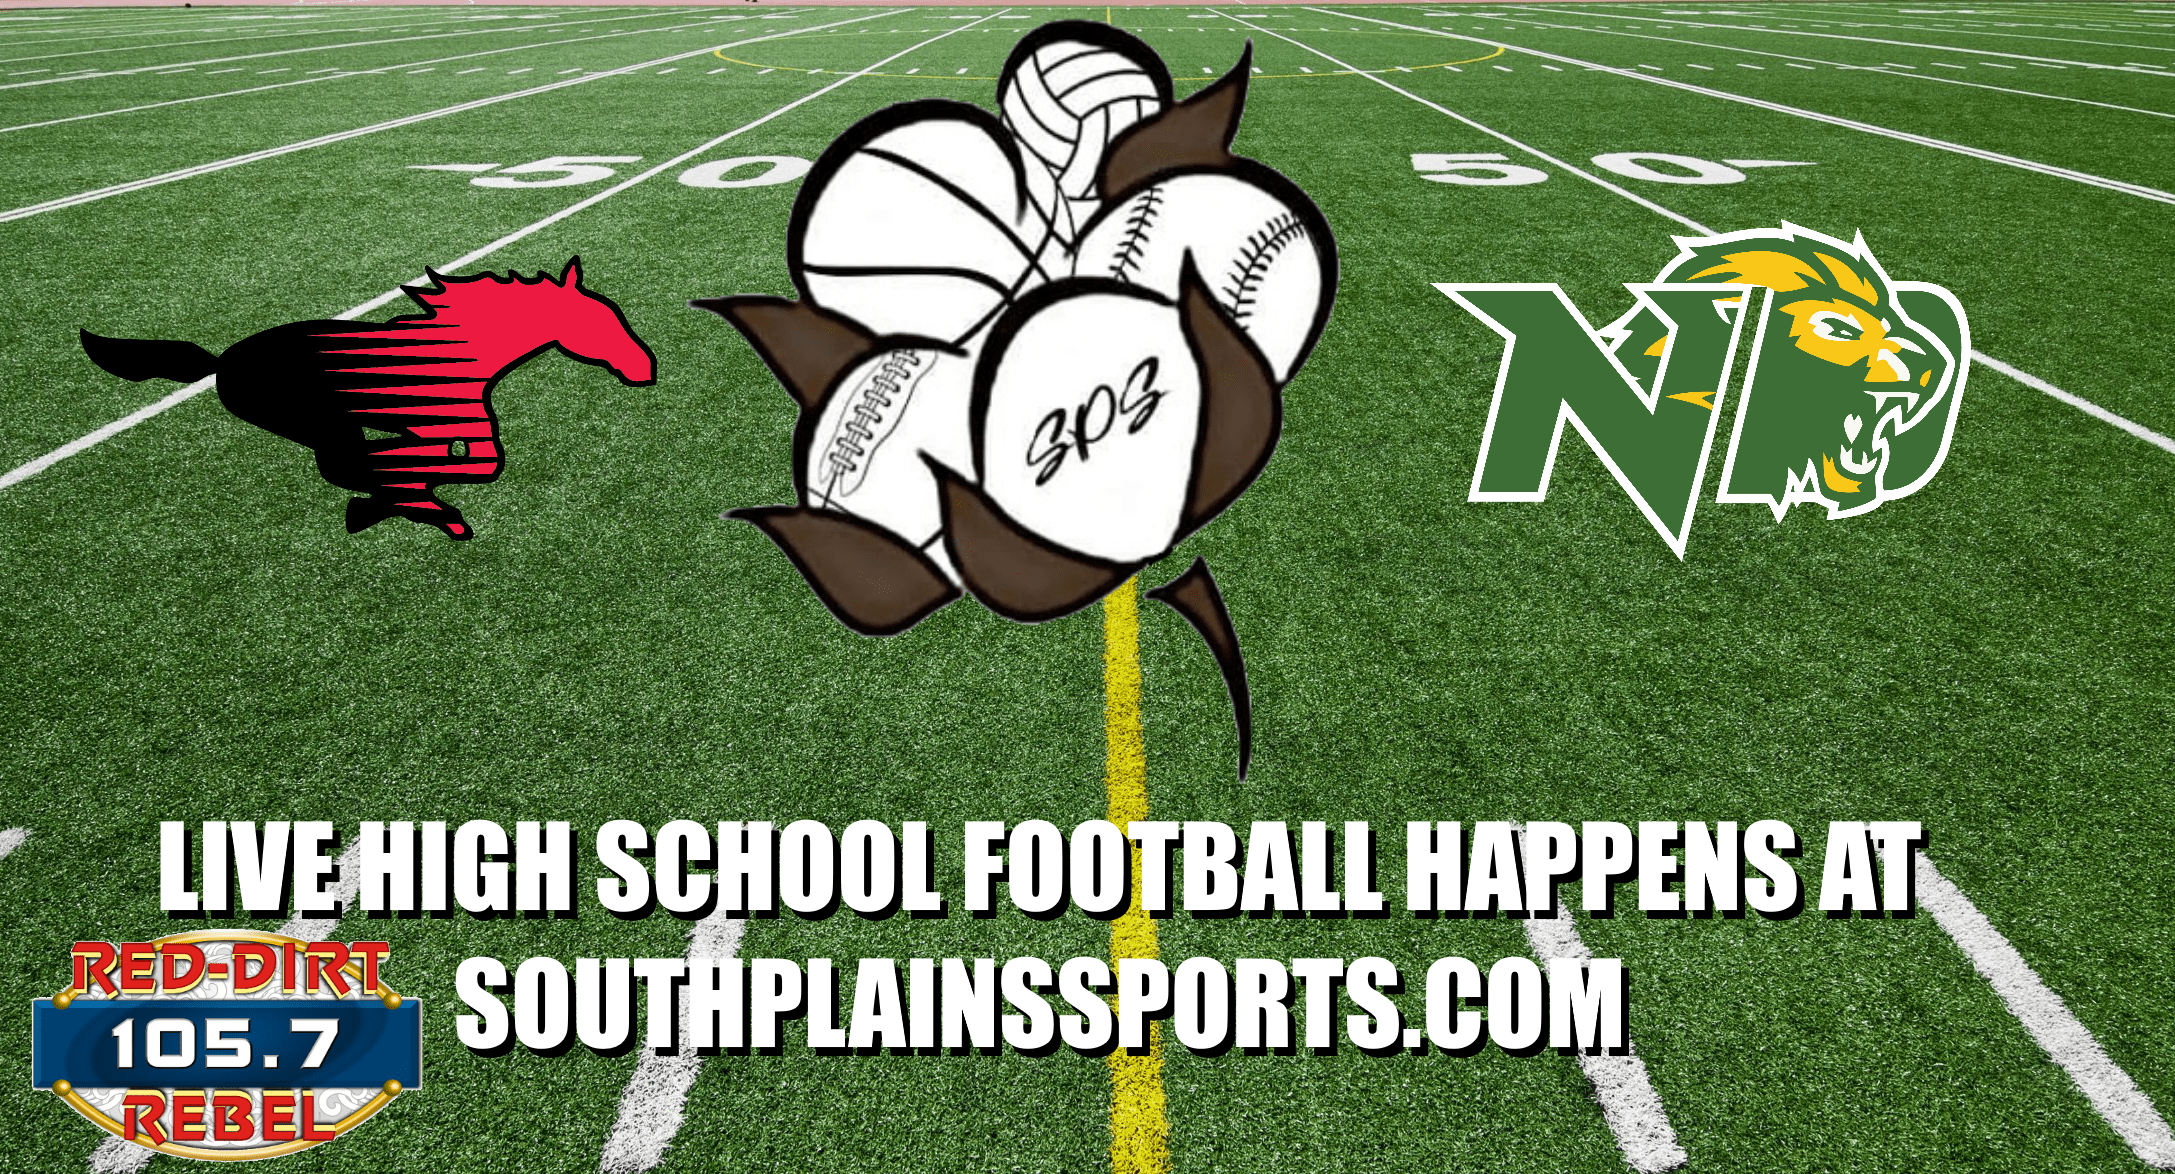 sps-football-with-logos